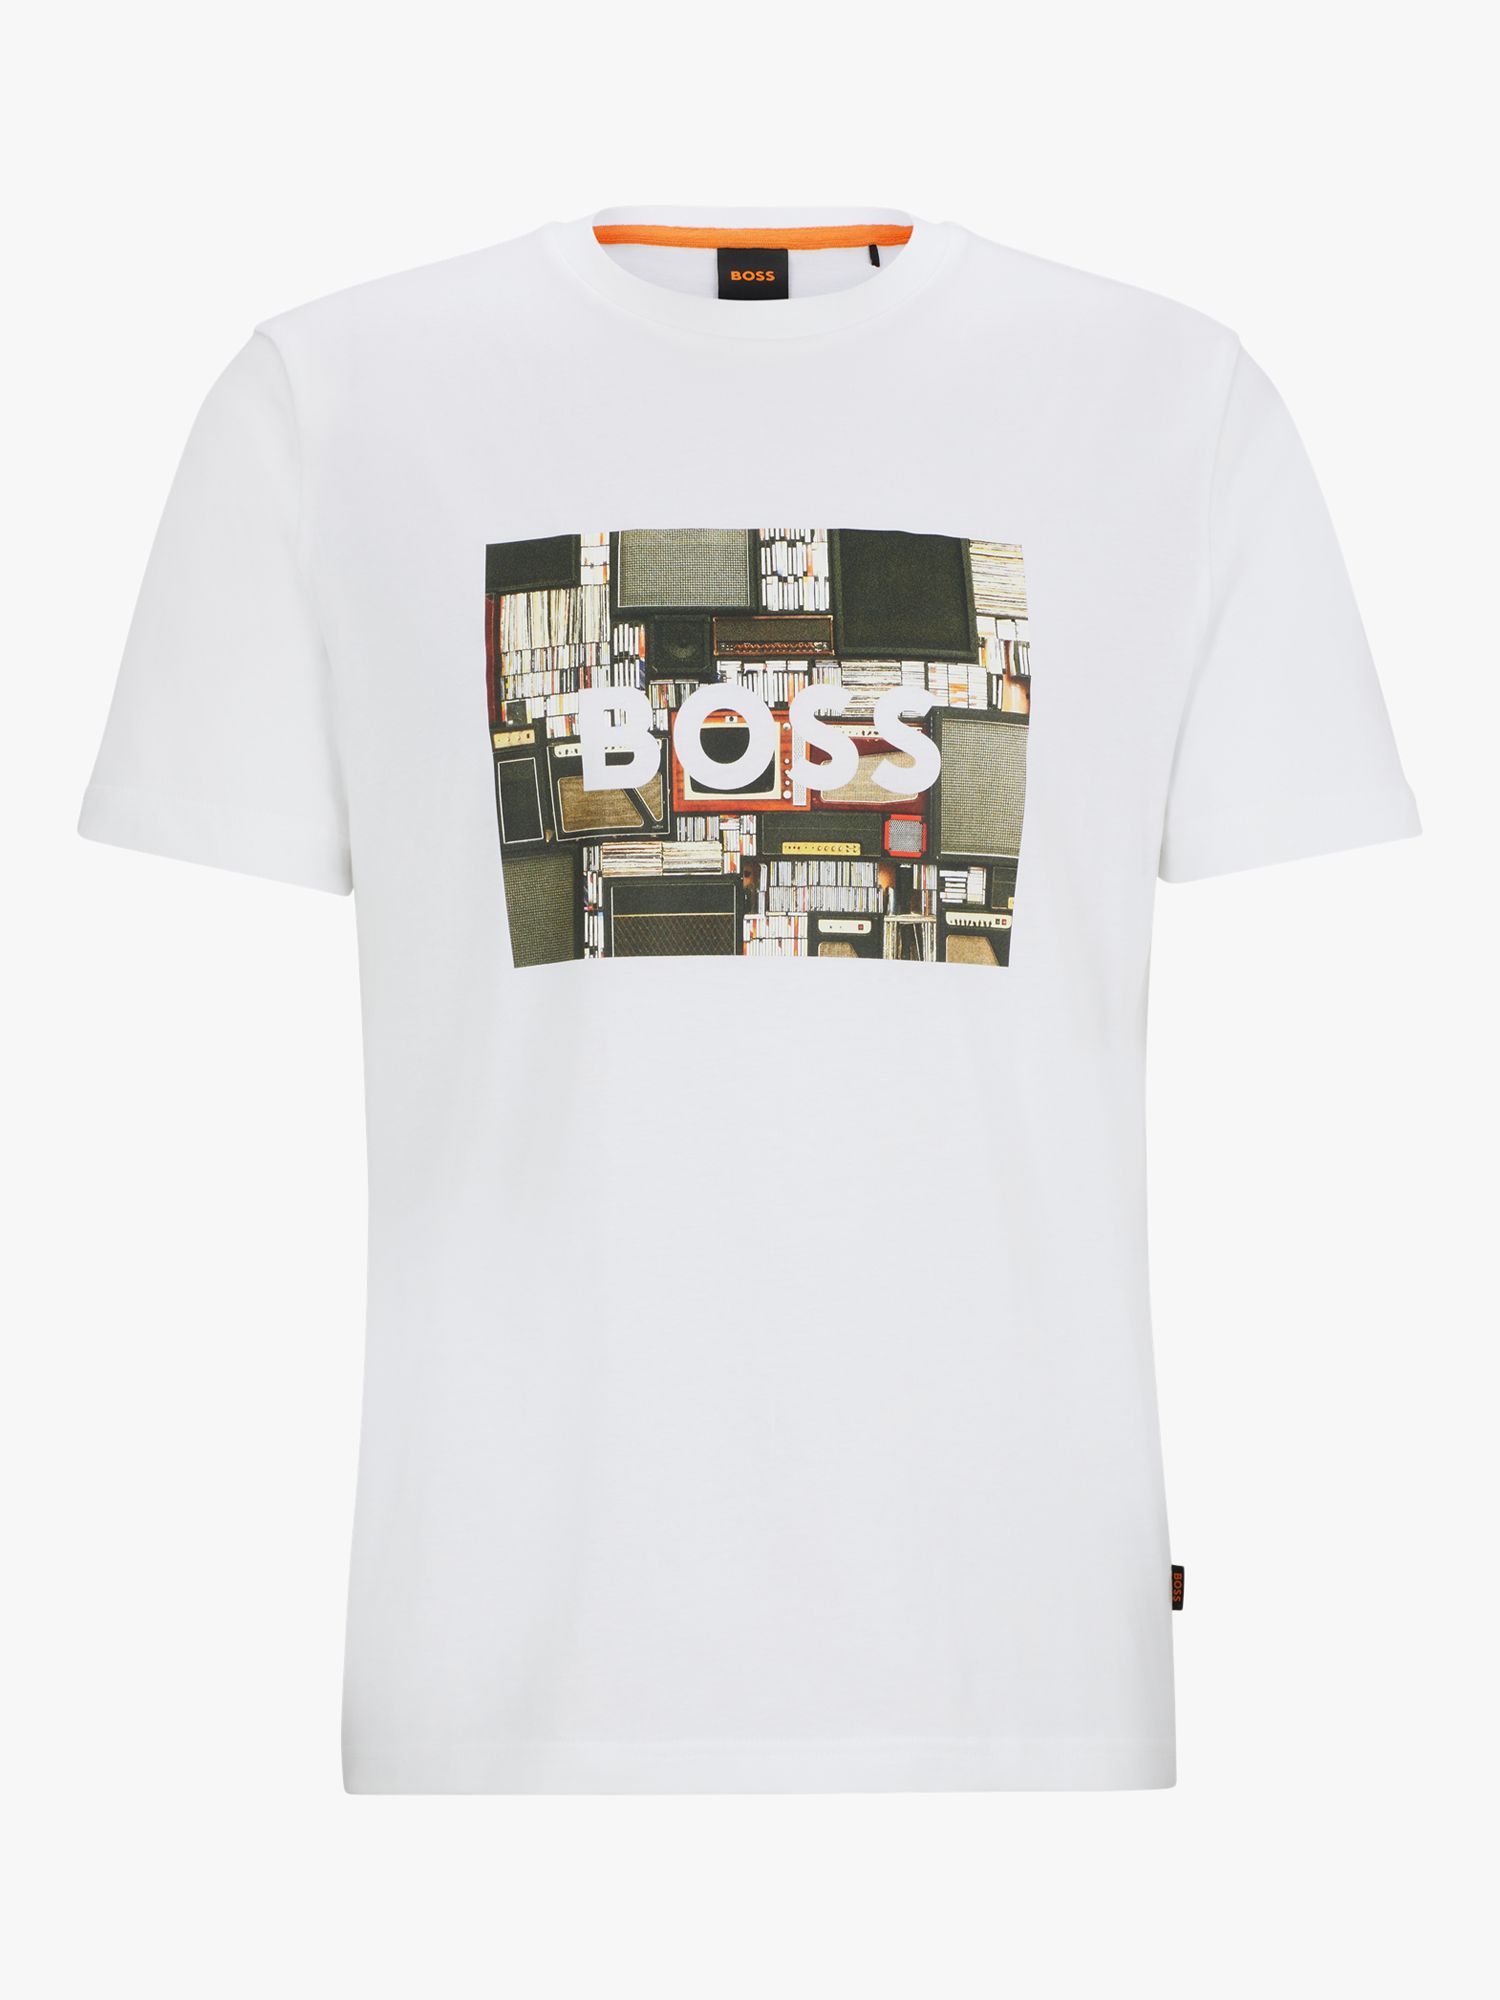 Buy BOSS Collection Theme T-Shirt, White/Multi Online at johnlewis.com